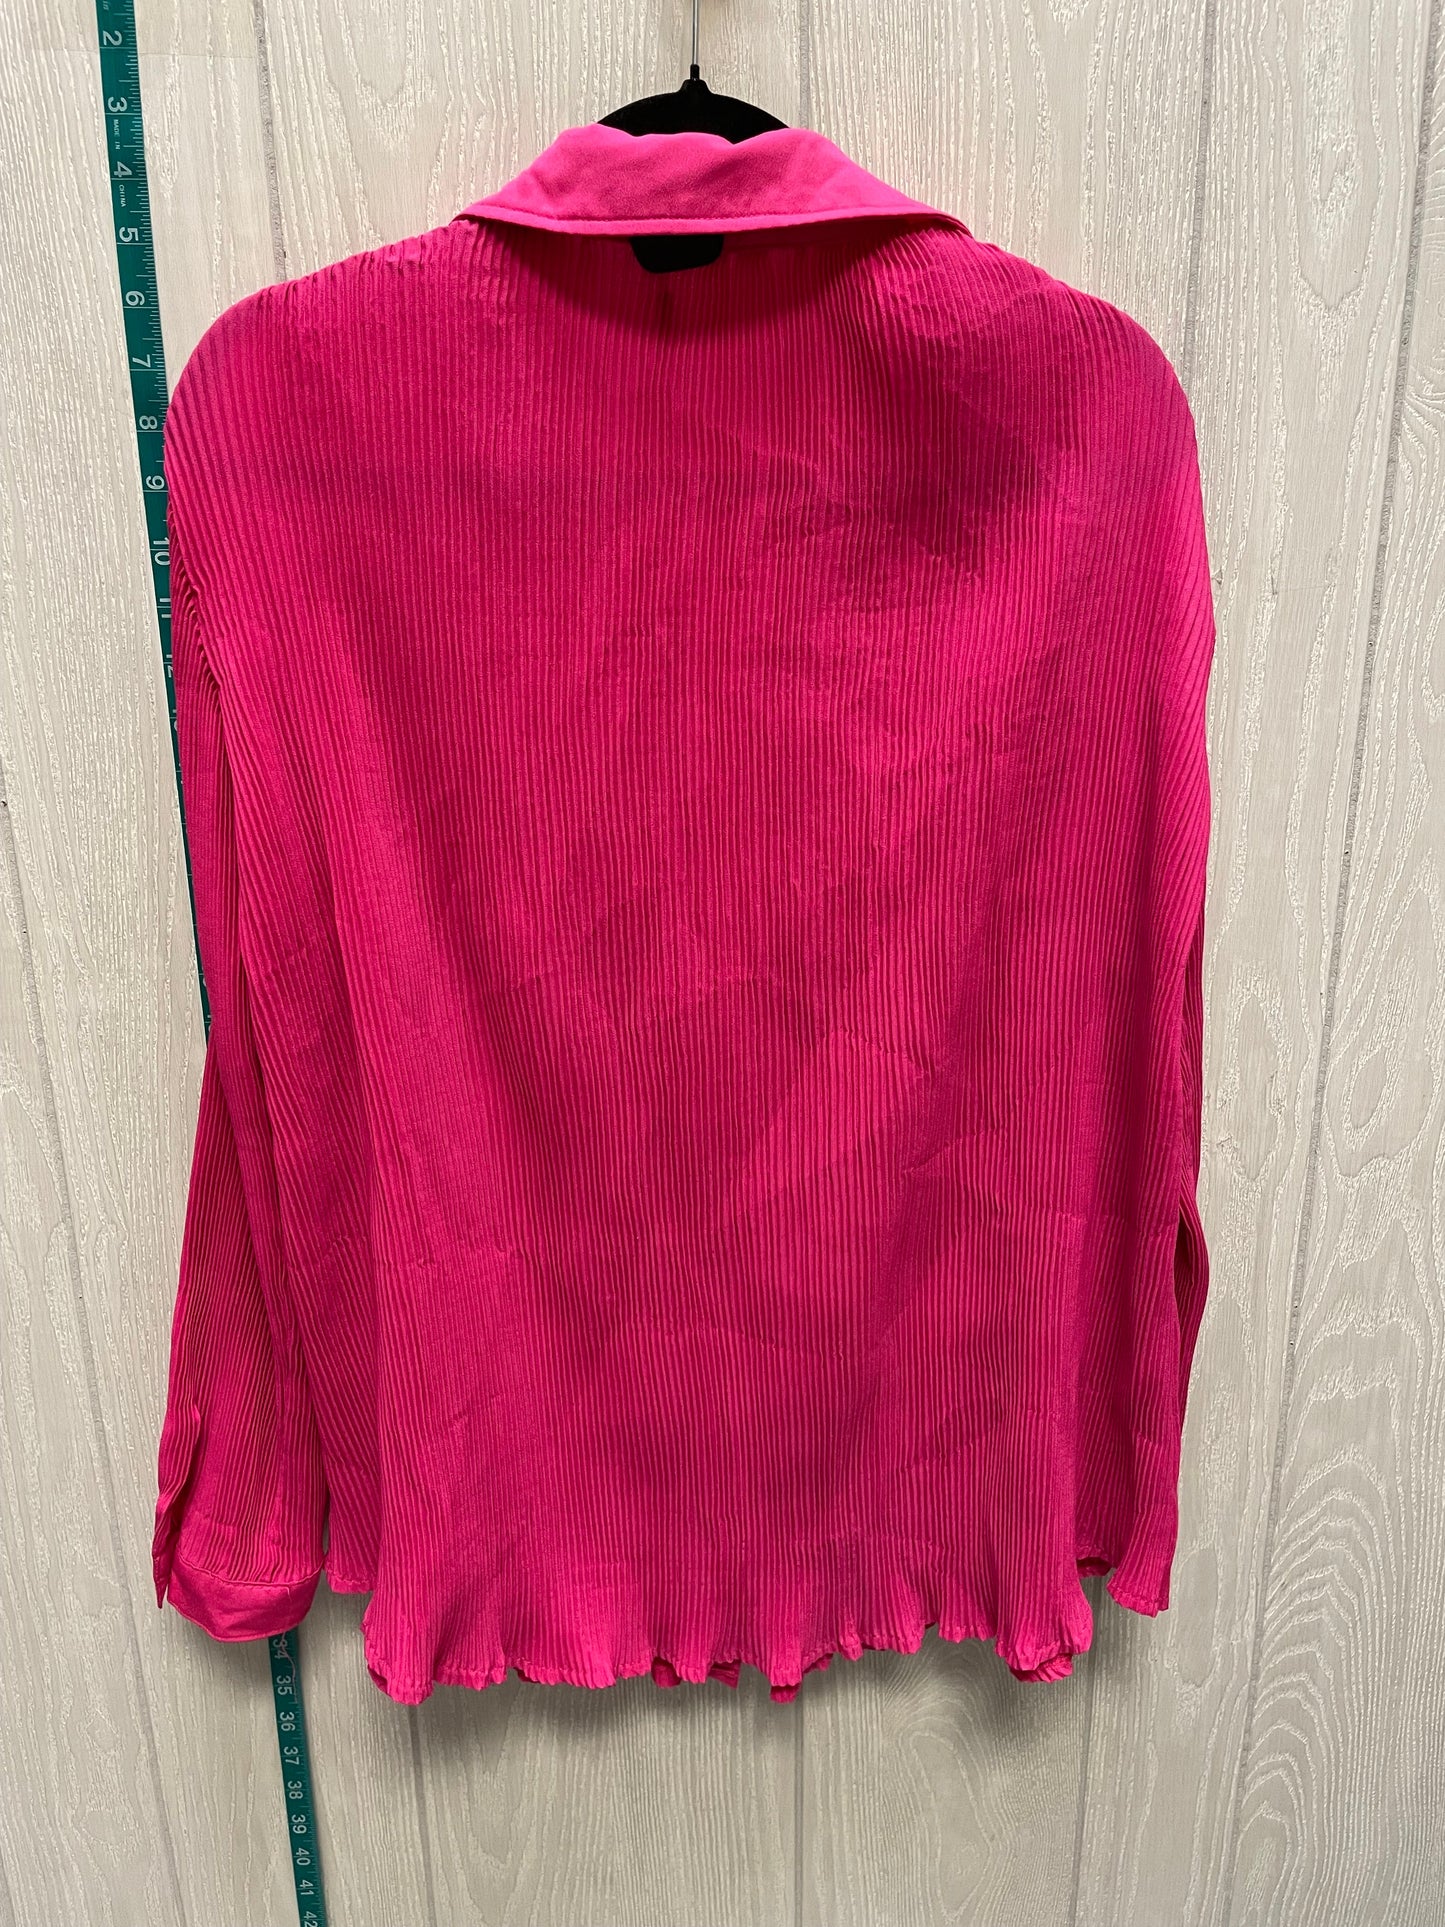 Pink Top Long Sleeve Pretty Little Thing, Size Xs